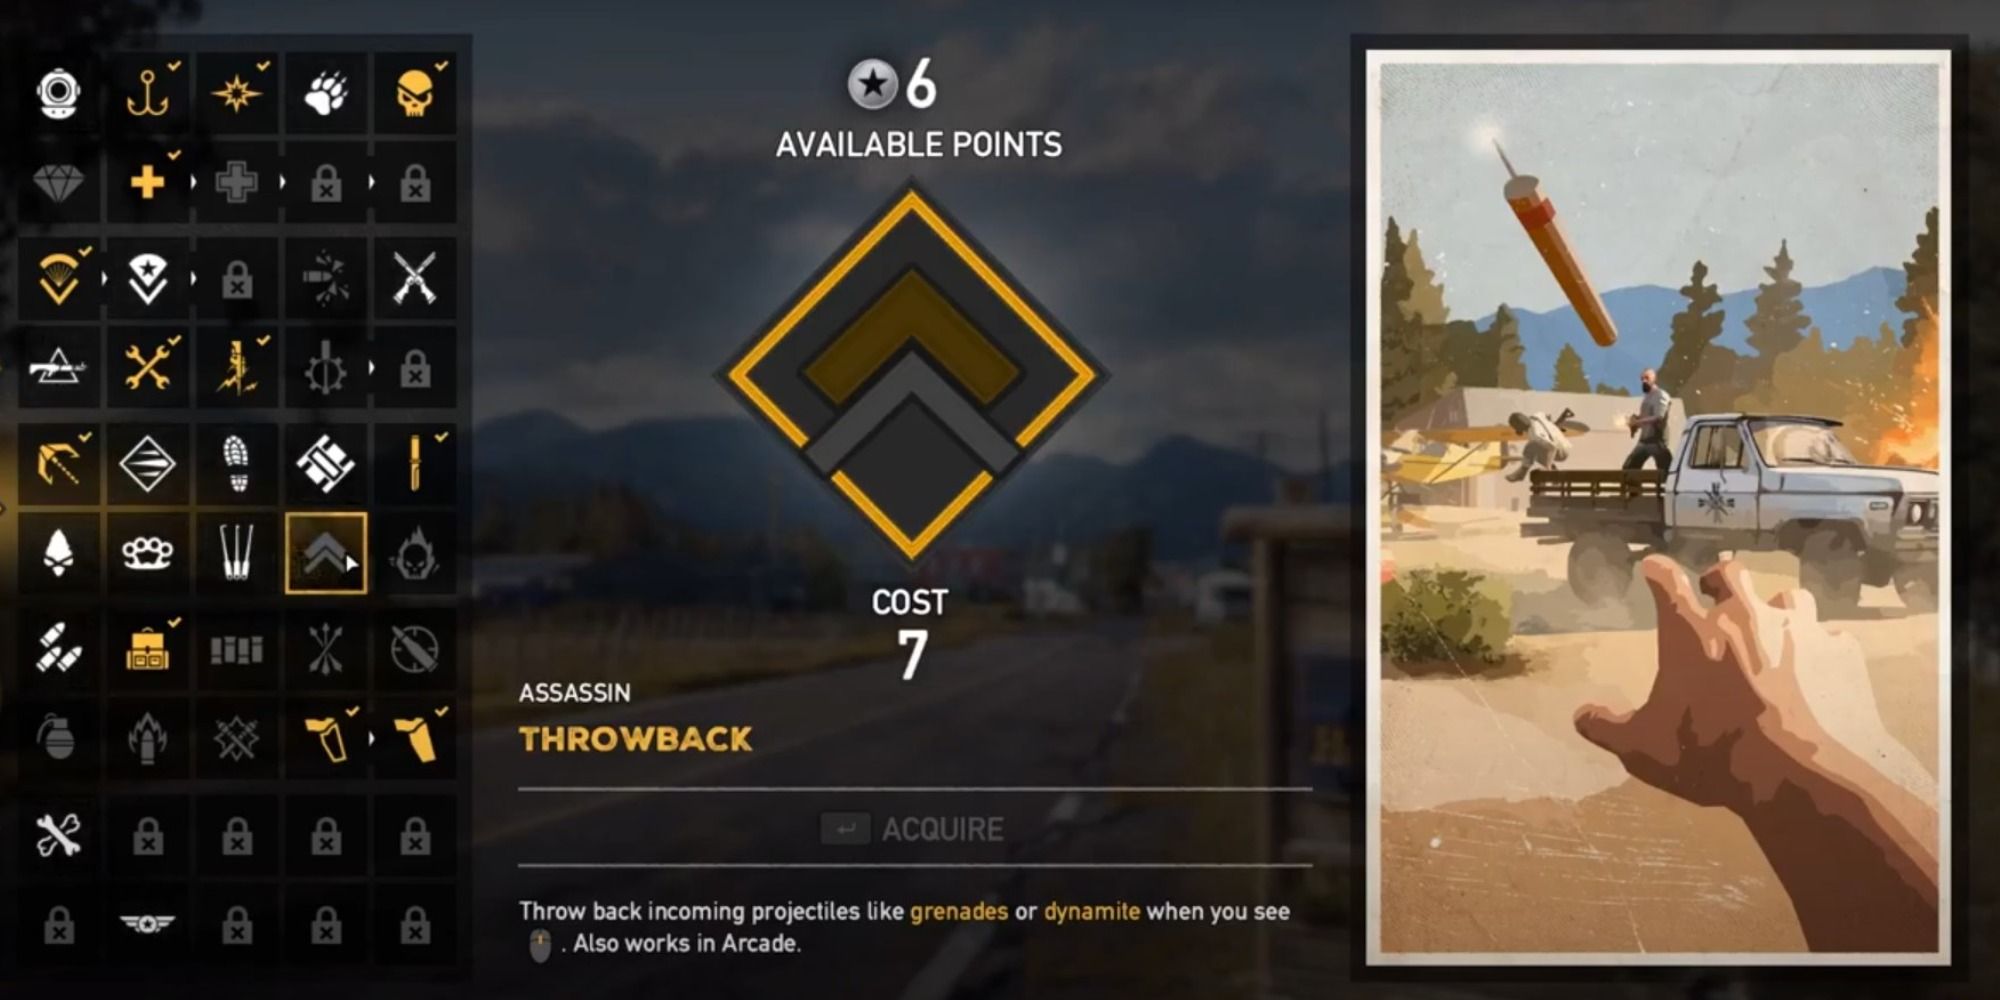 Throwback Perk description and image